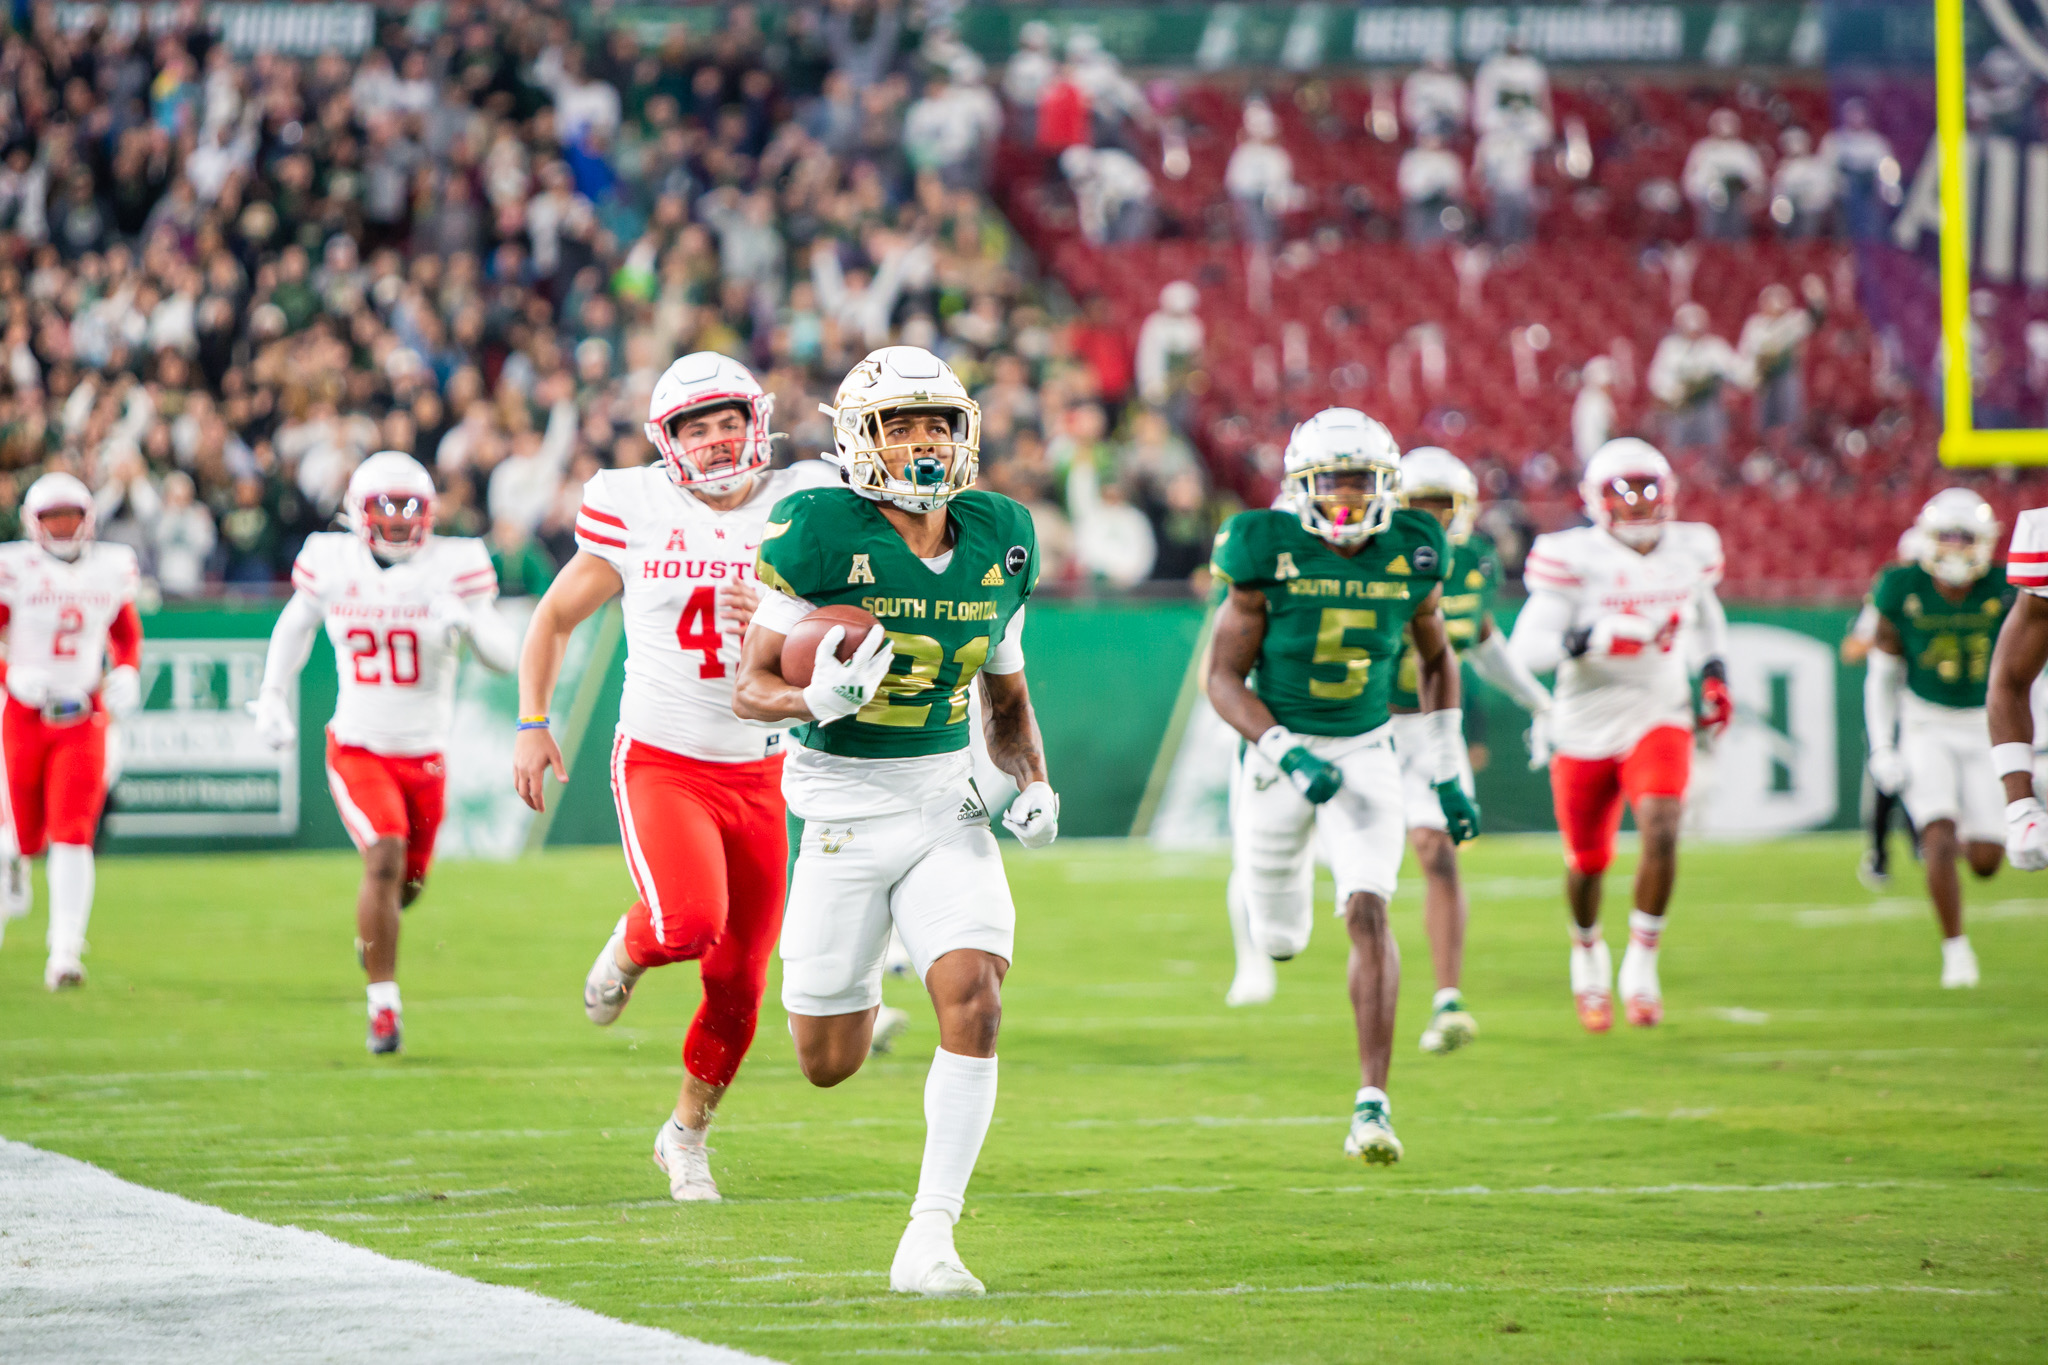 USF’s defense disappoints in homecoming loss to Houston